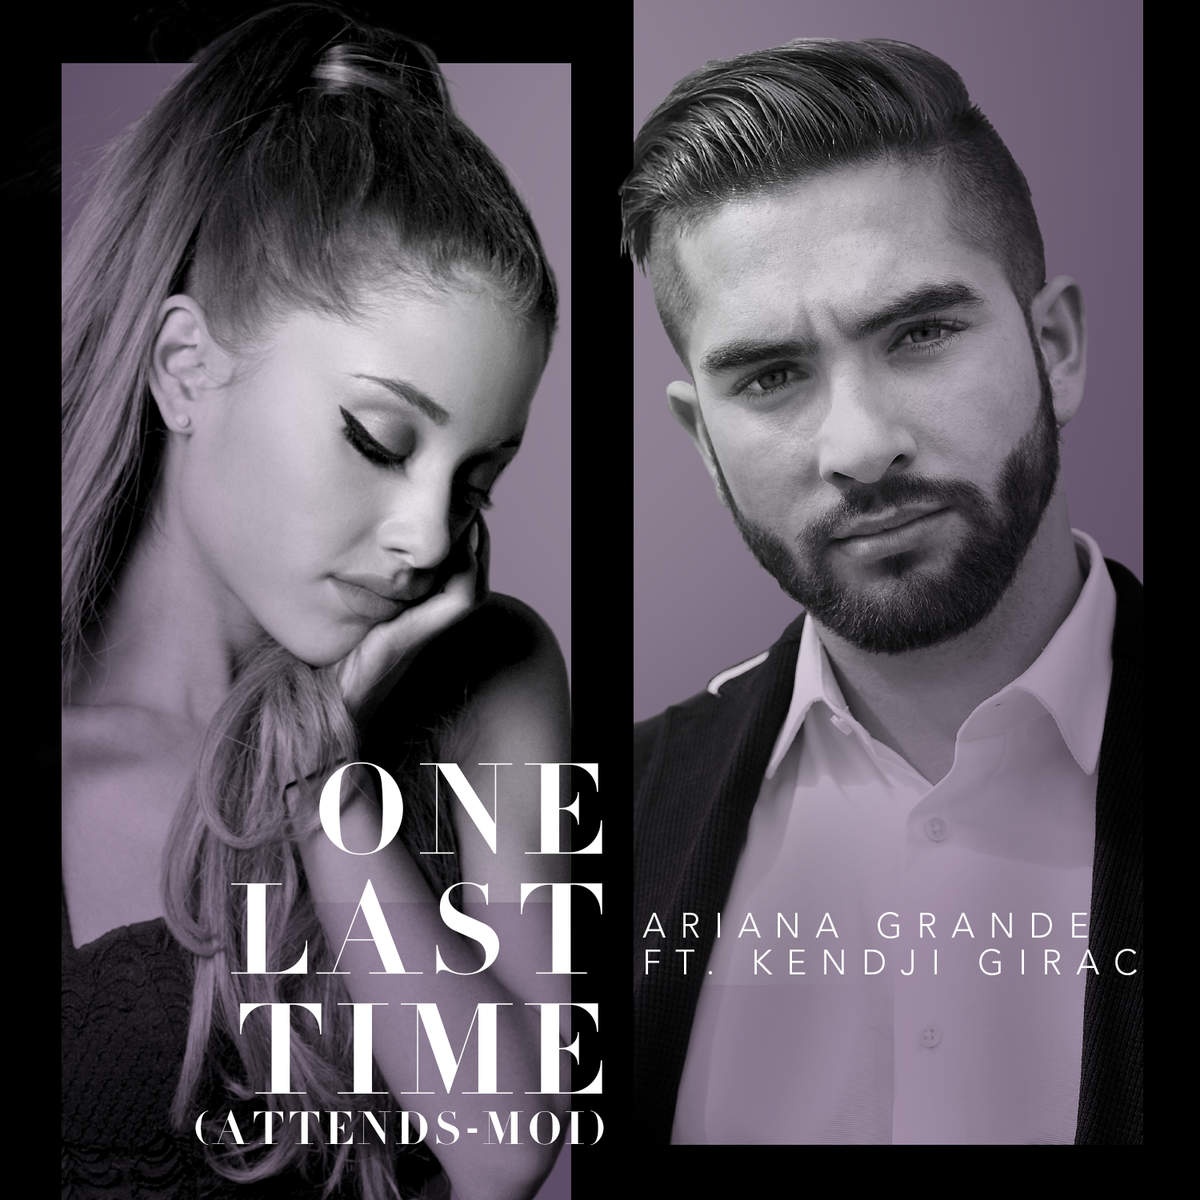 One Last Time (Attends-moi) [feat. Kendji Girac]